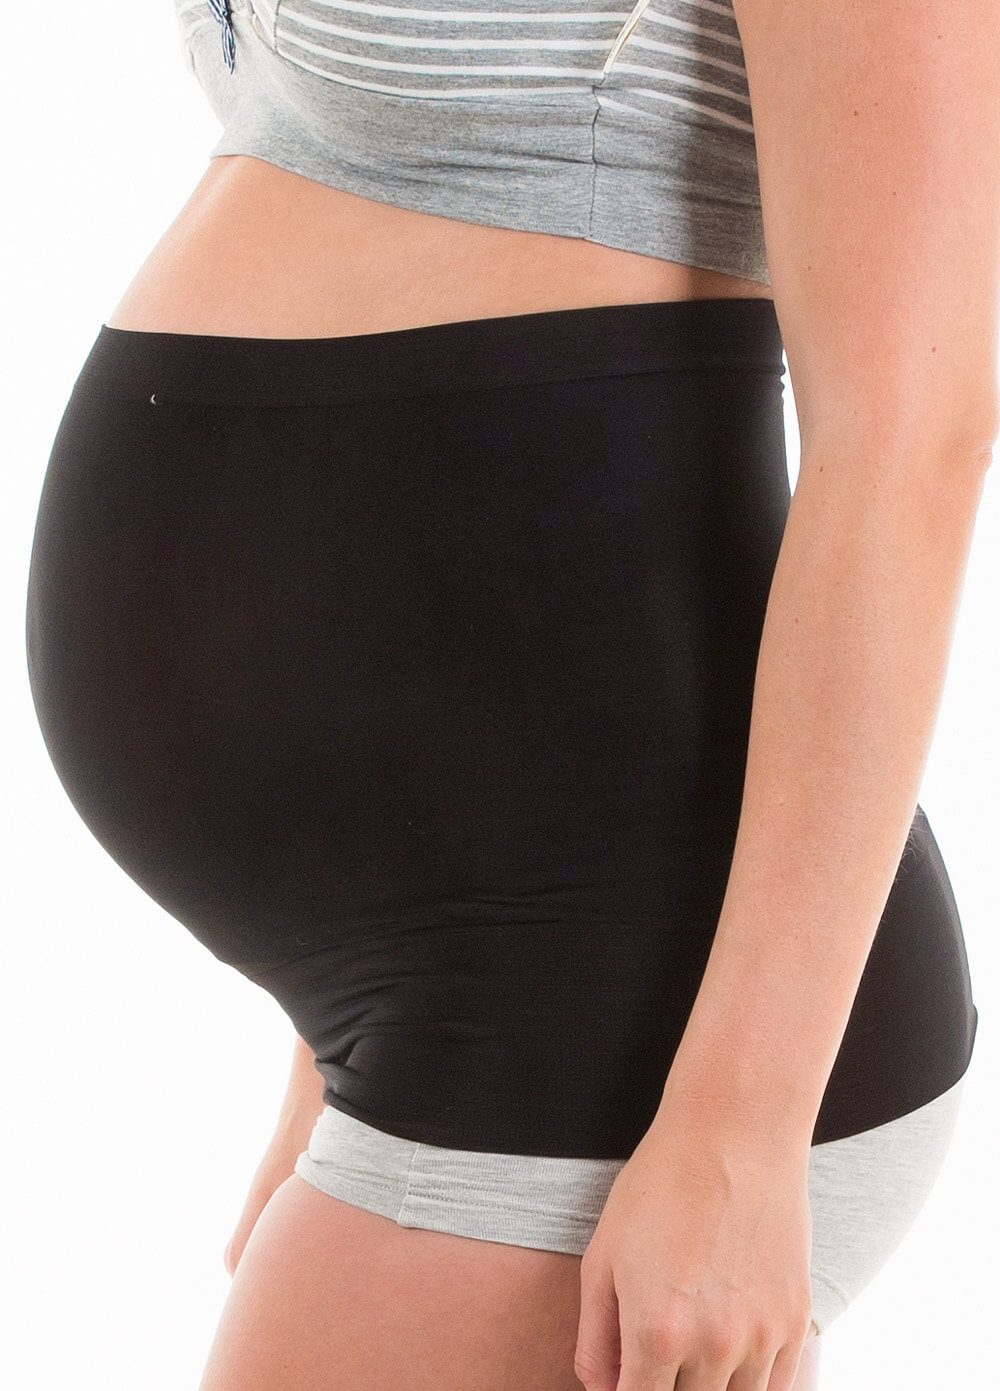 Maternity Support Belly Band in Black by Preggers